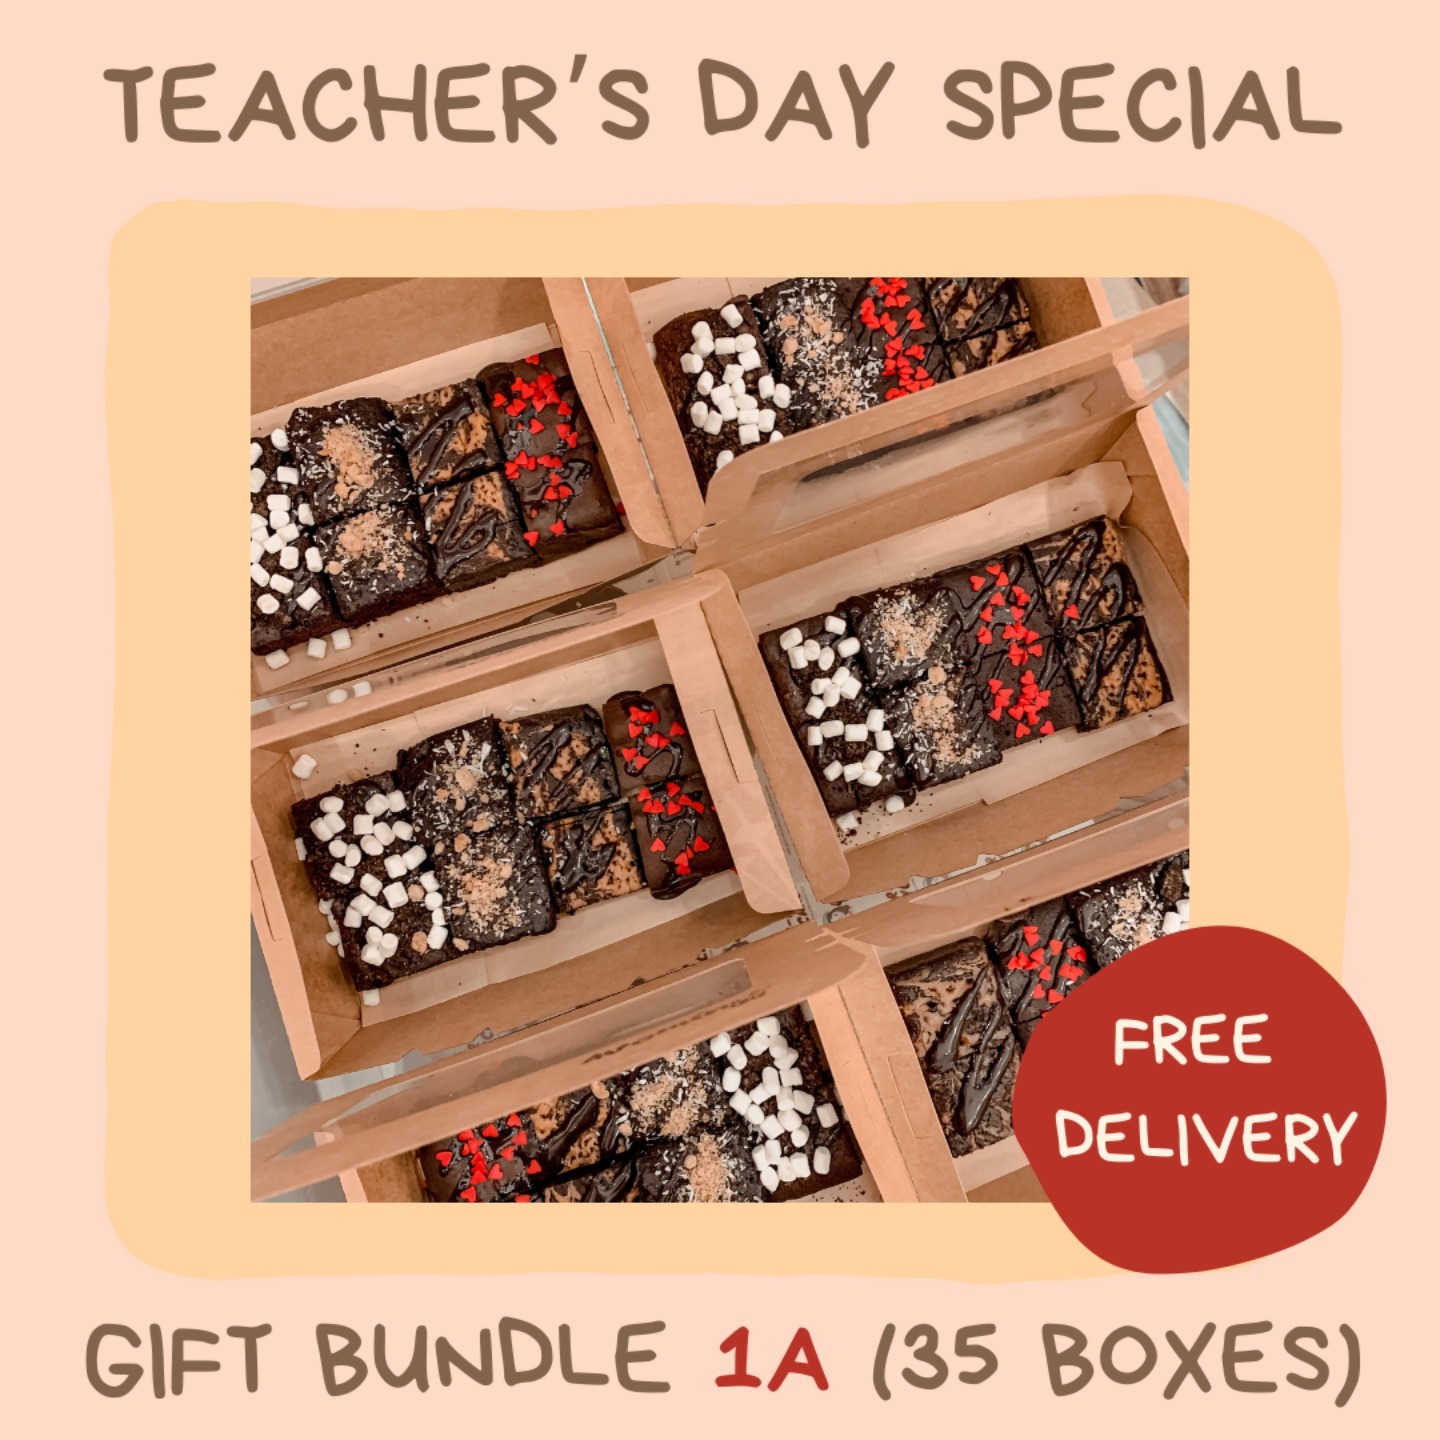 FREE DELIVERY GIFT BUNDLE 1A  35 BOXES